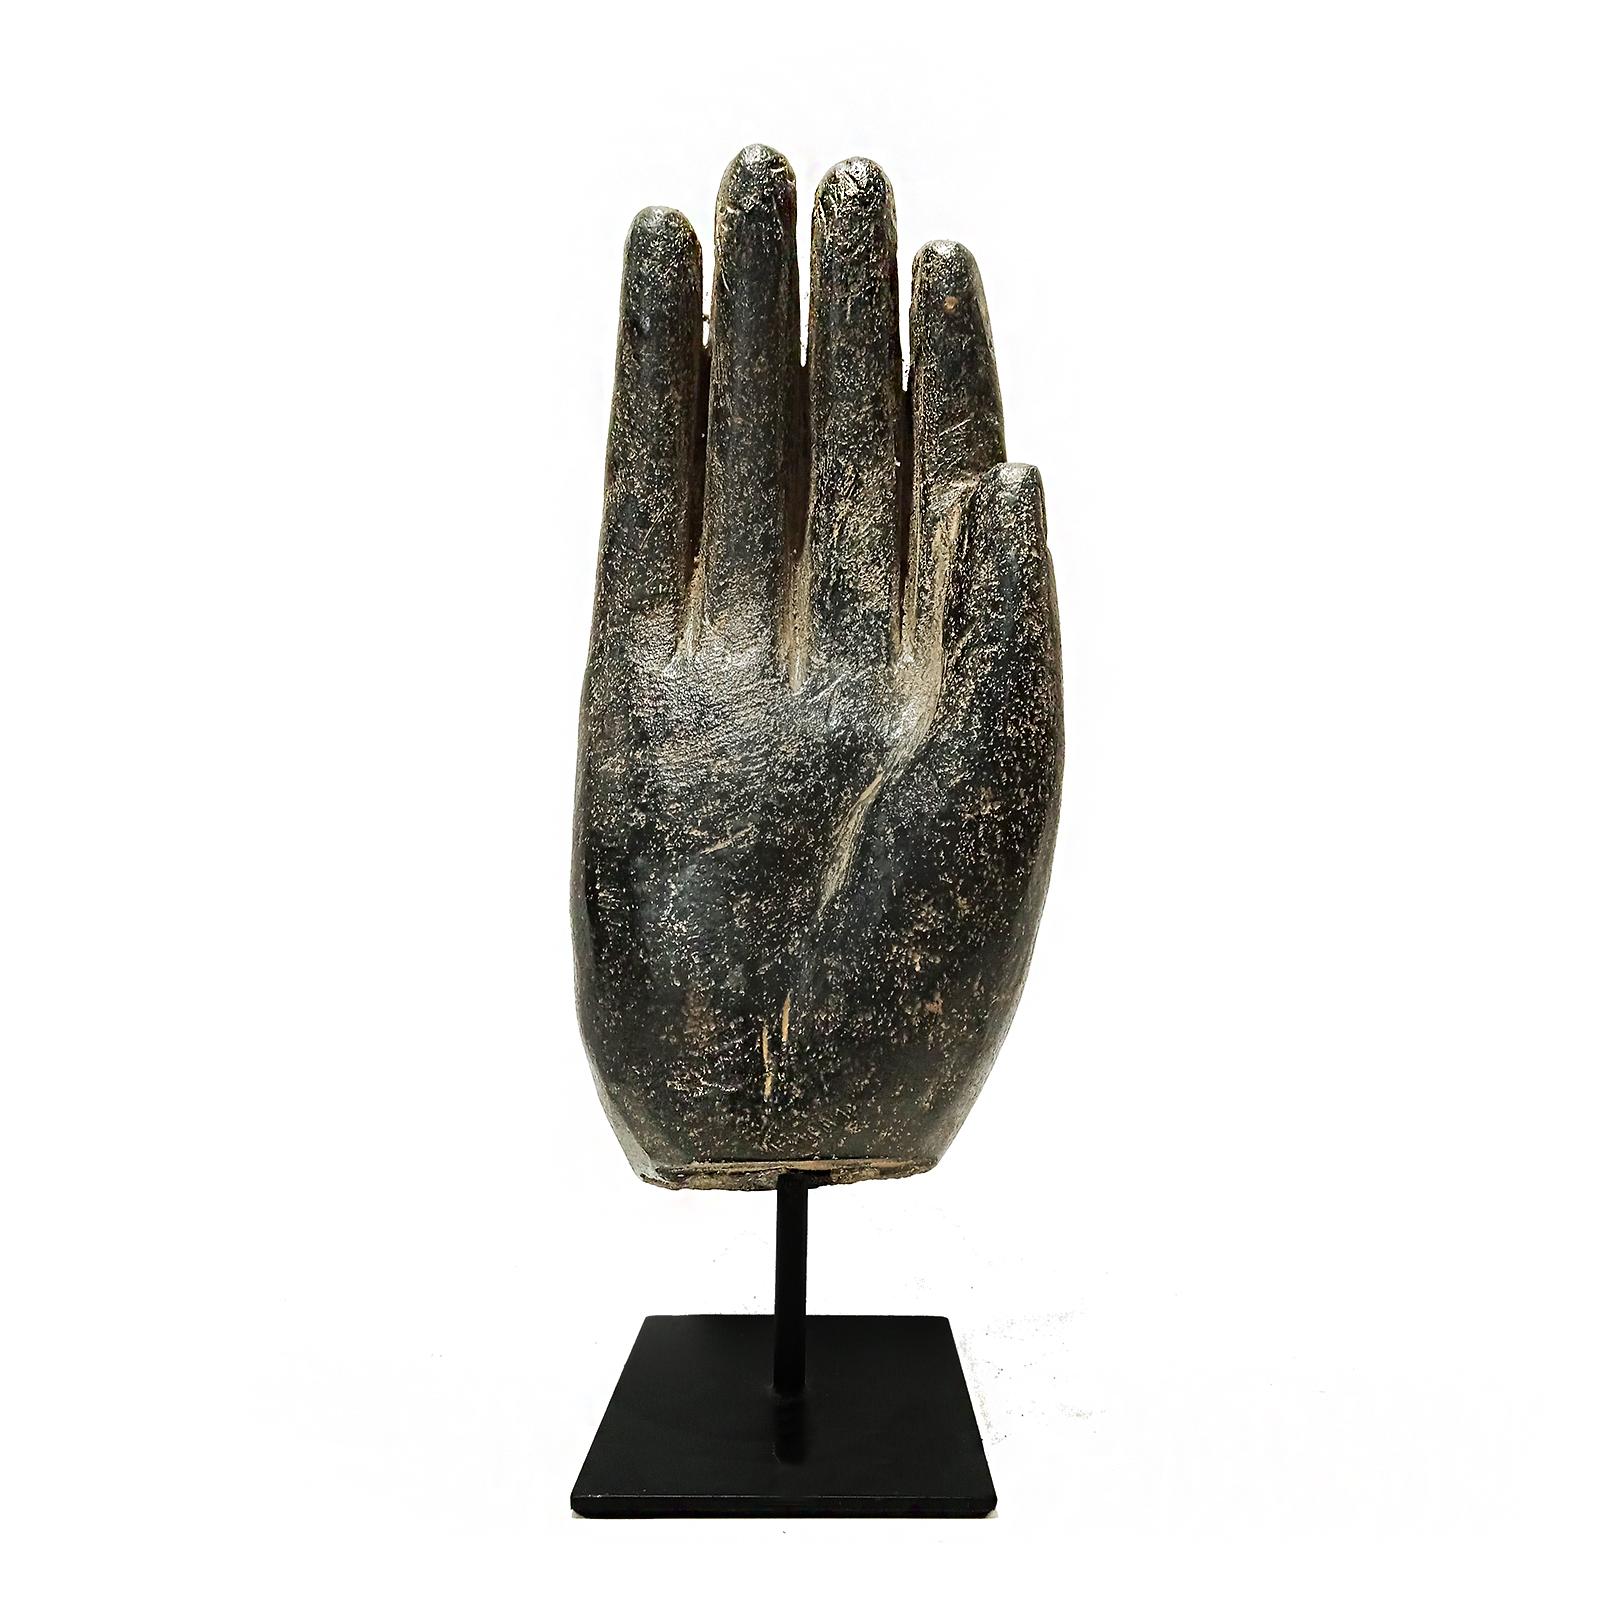 Stone Three Volcanic Rock Hand Sculptures, Mid 20th Century For Sale